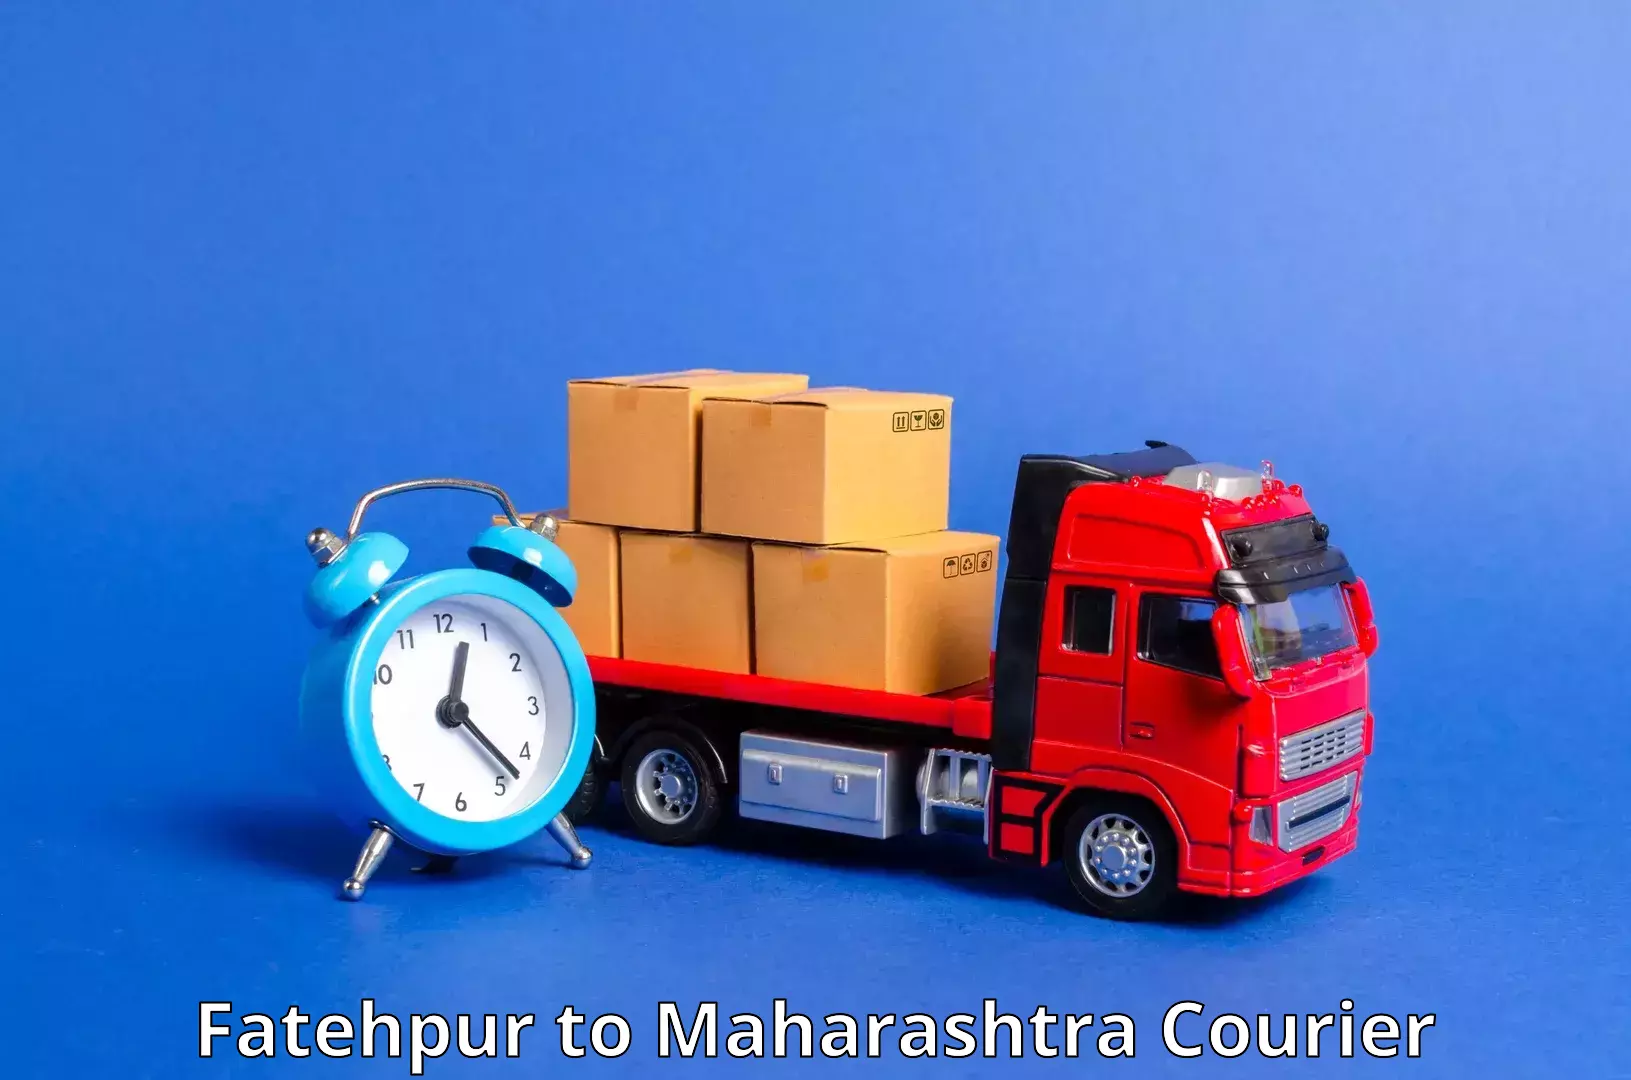 Same-day delivery solutions Fatehpur to Ballarpur